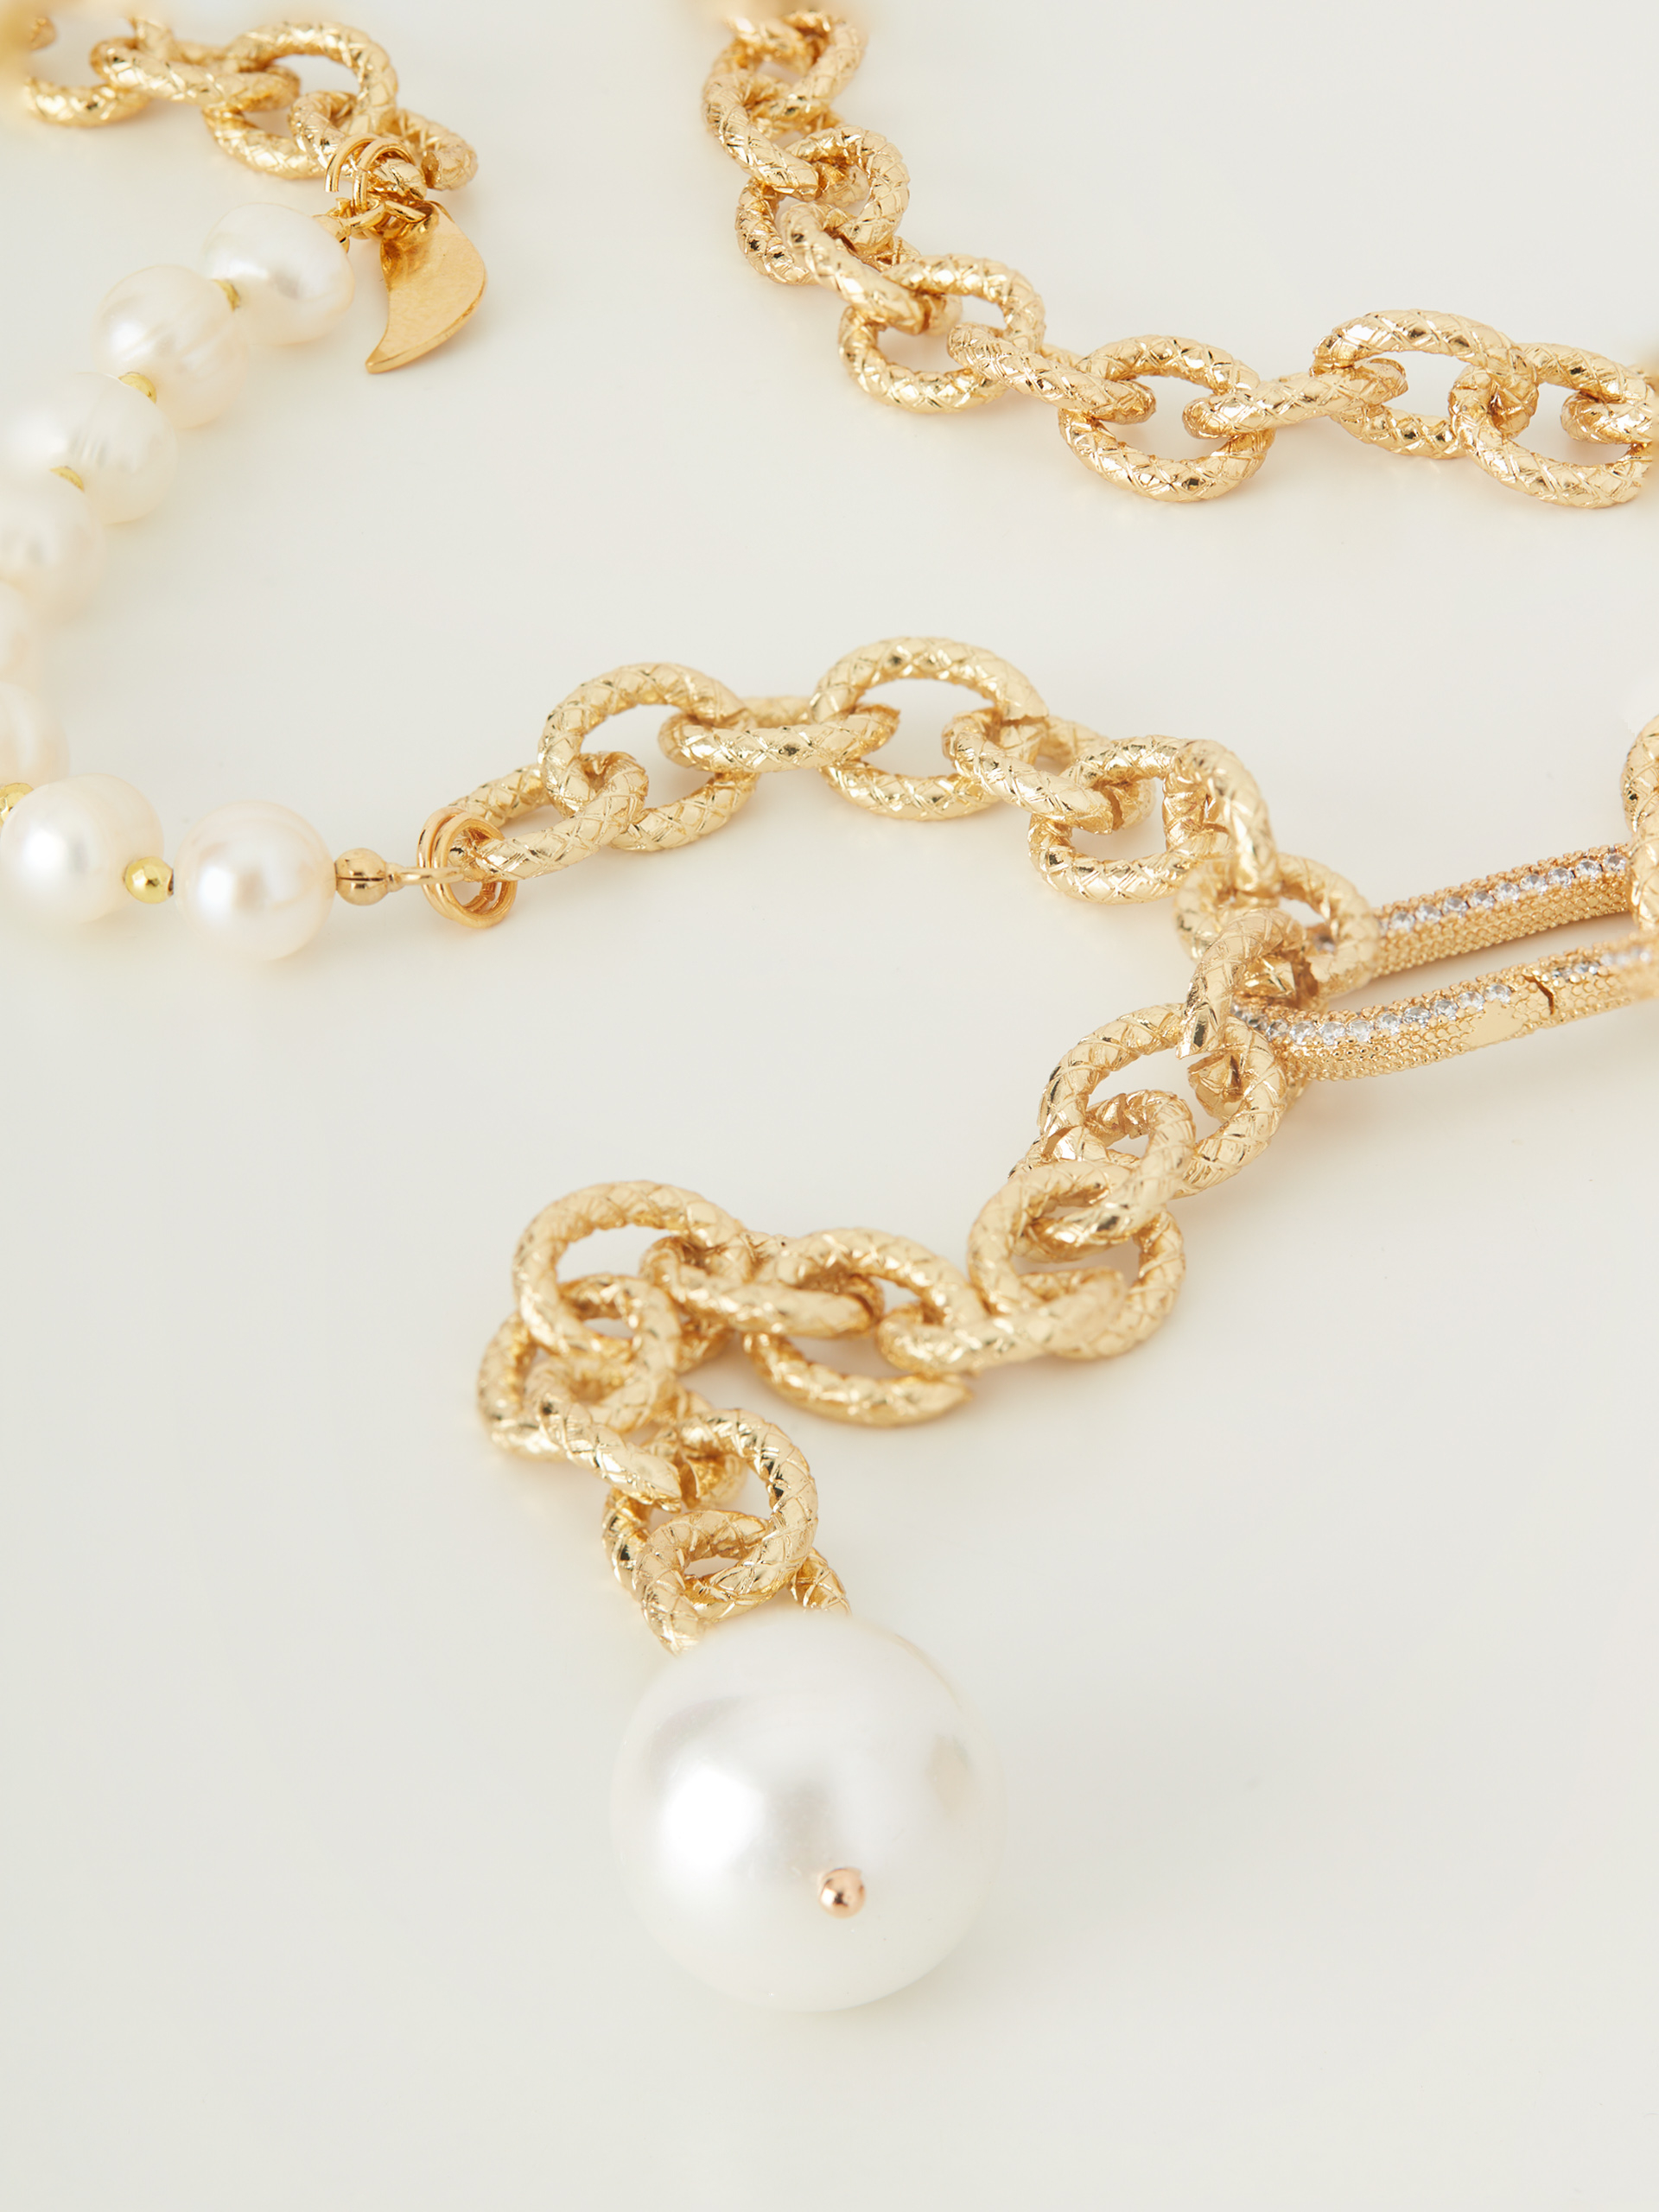 Long necklace with pearls